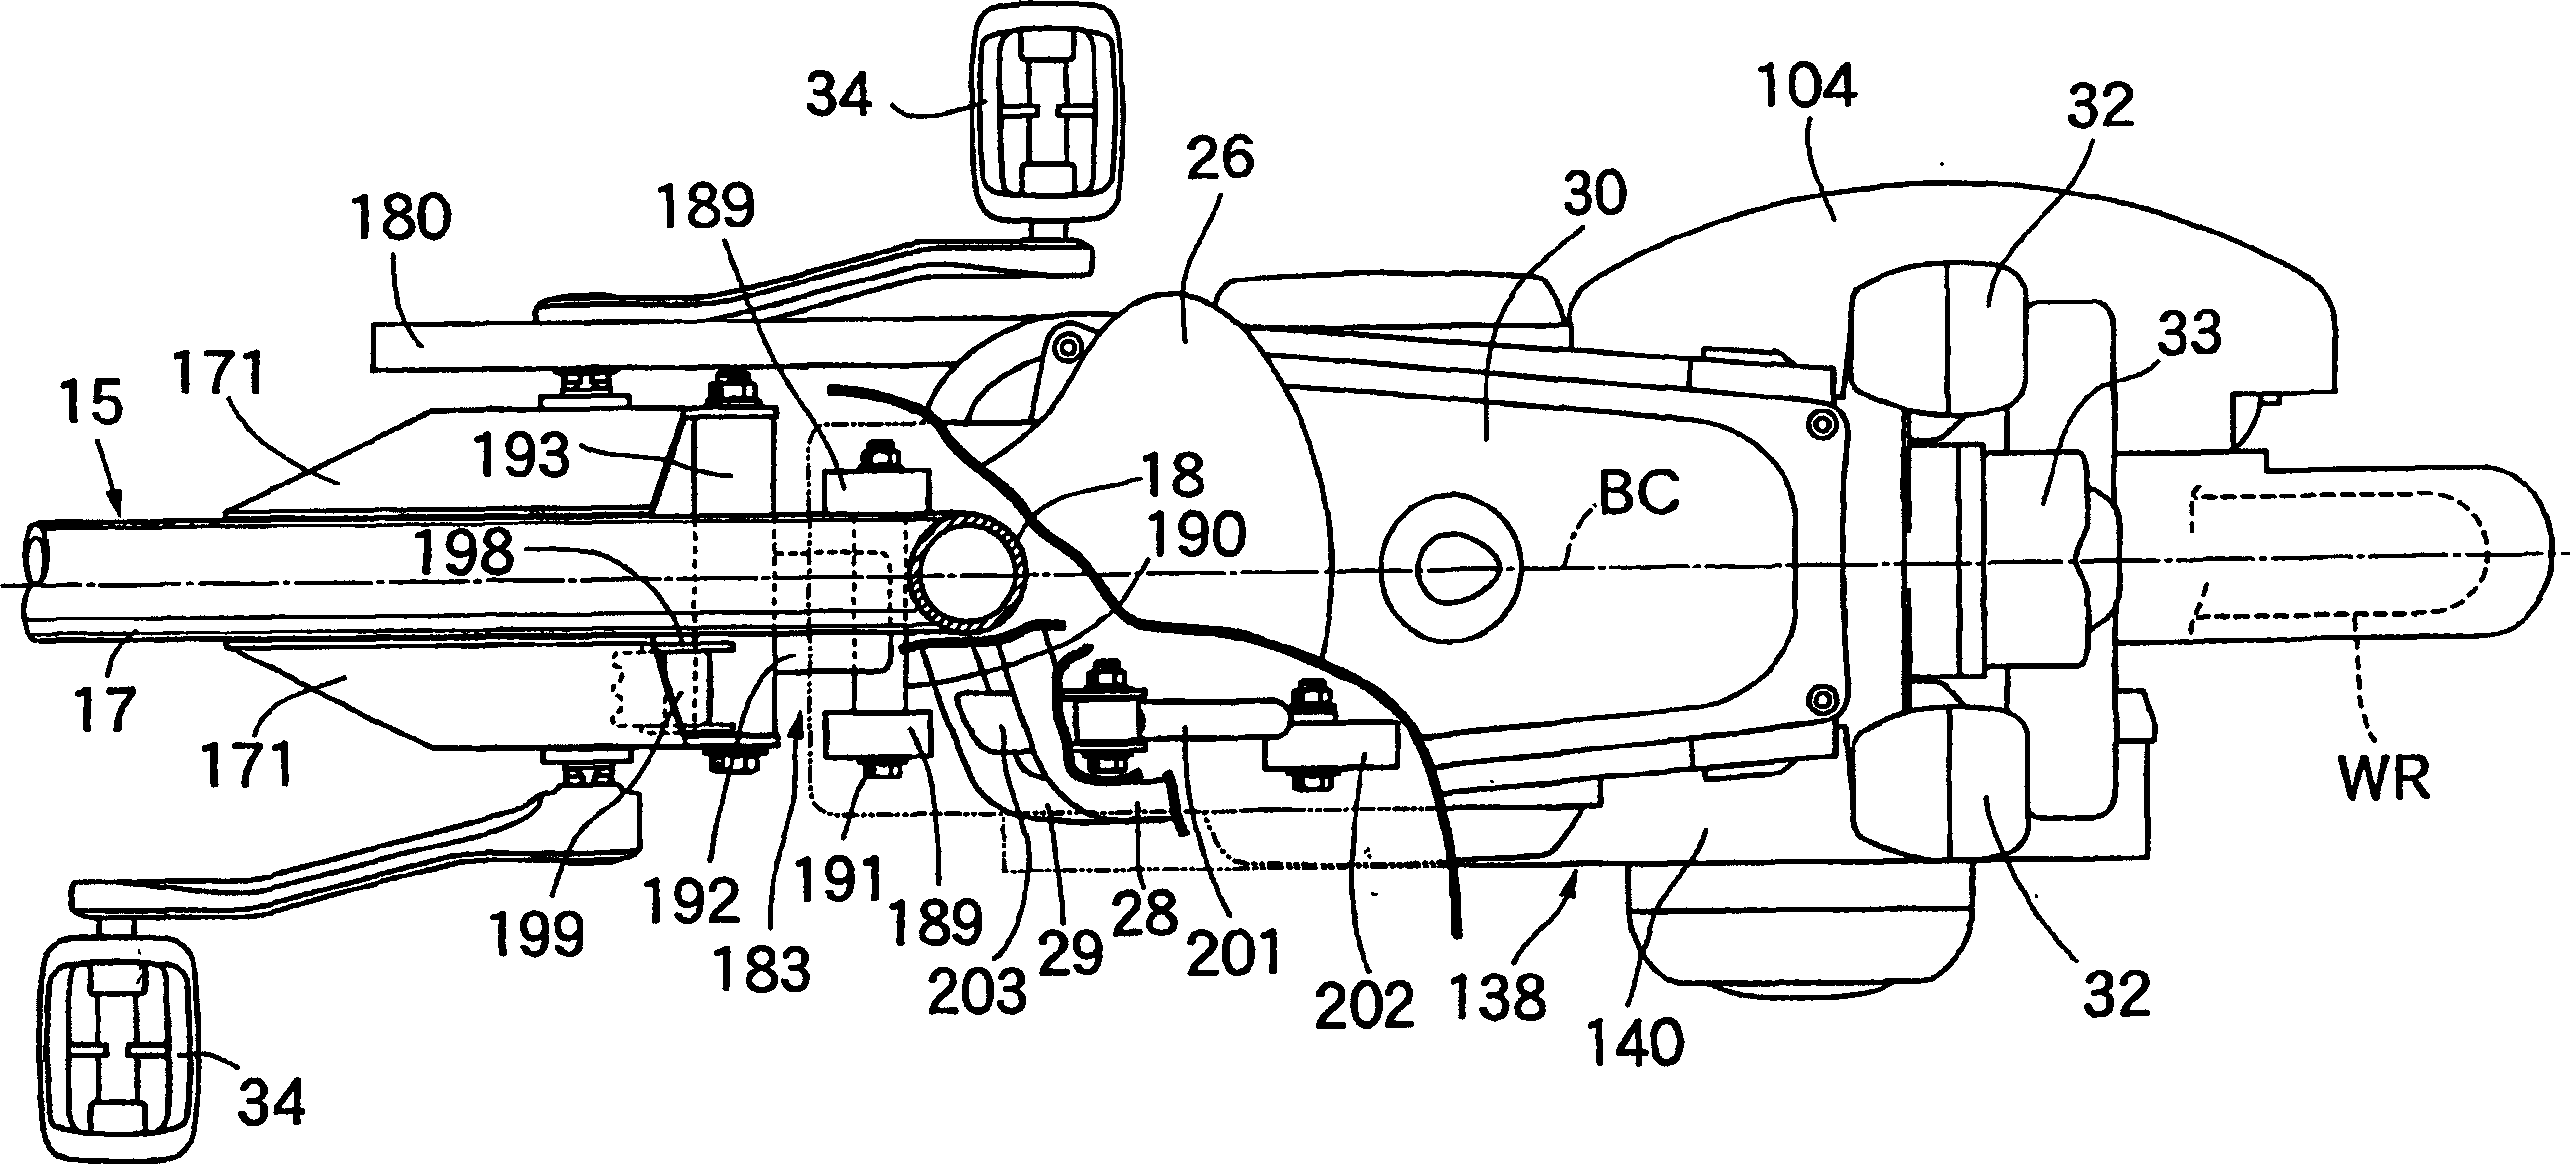 Two-wheel motorcycle power unit support structure